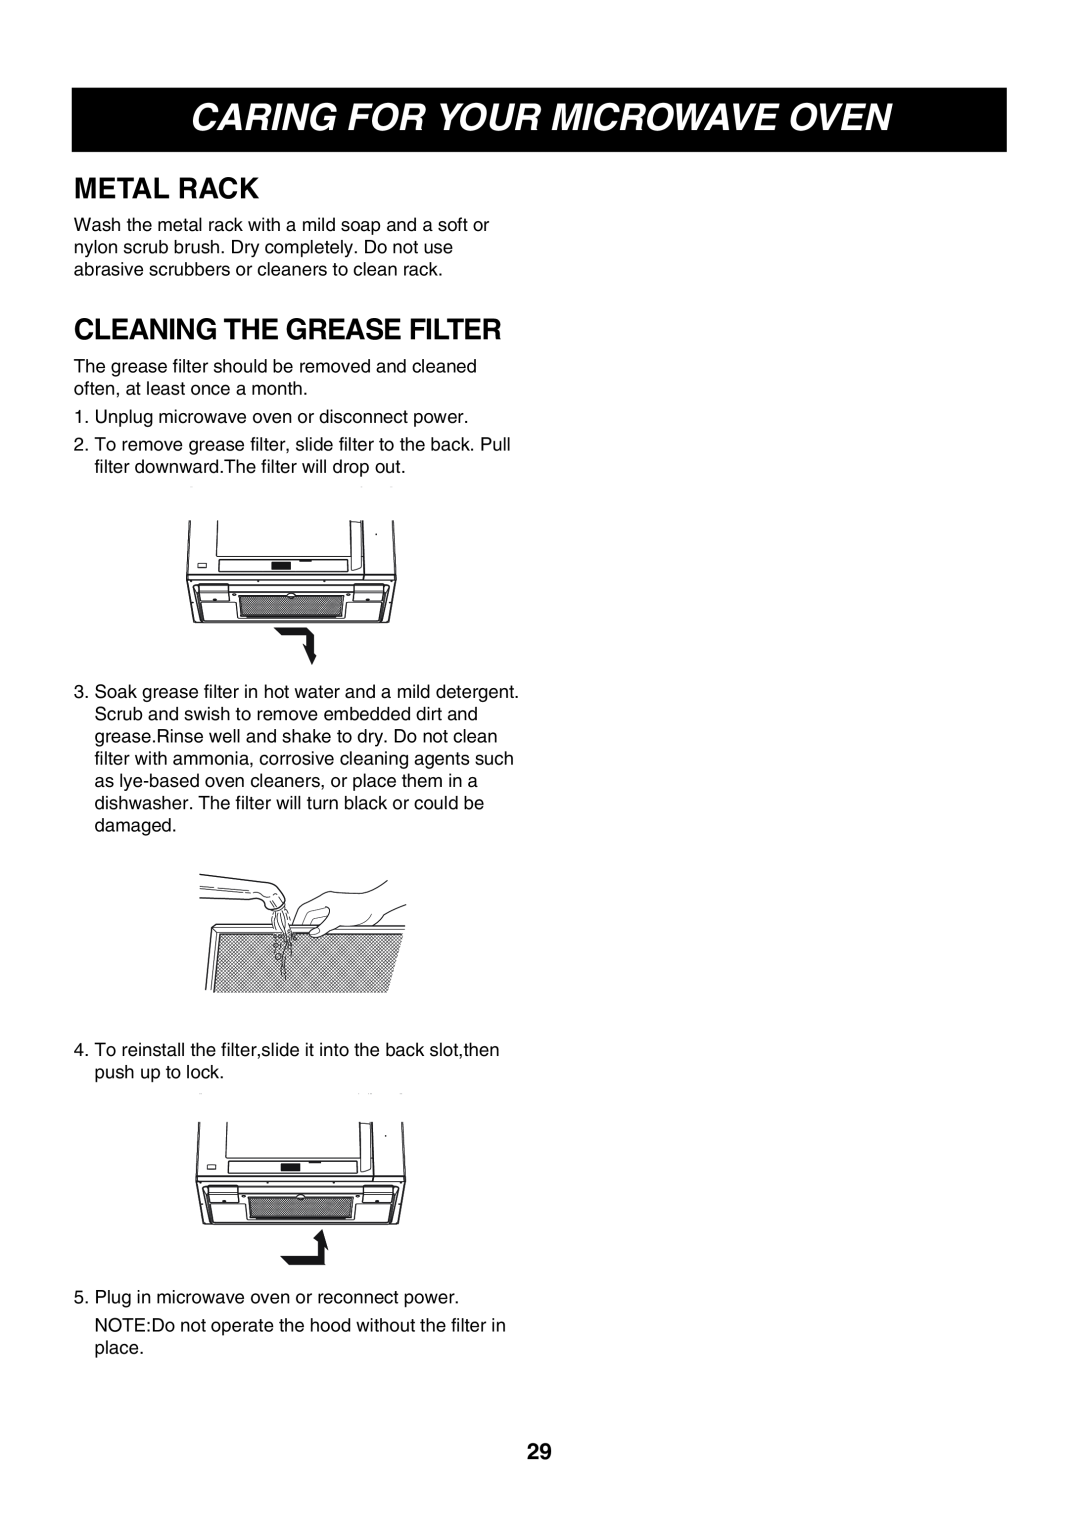 Minolta LMVM2085SB owner manual Cleaning The Grease Filter, Caring For Your Microwave Oven, Metal Rack 